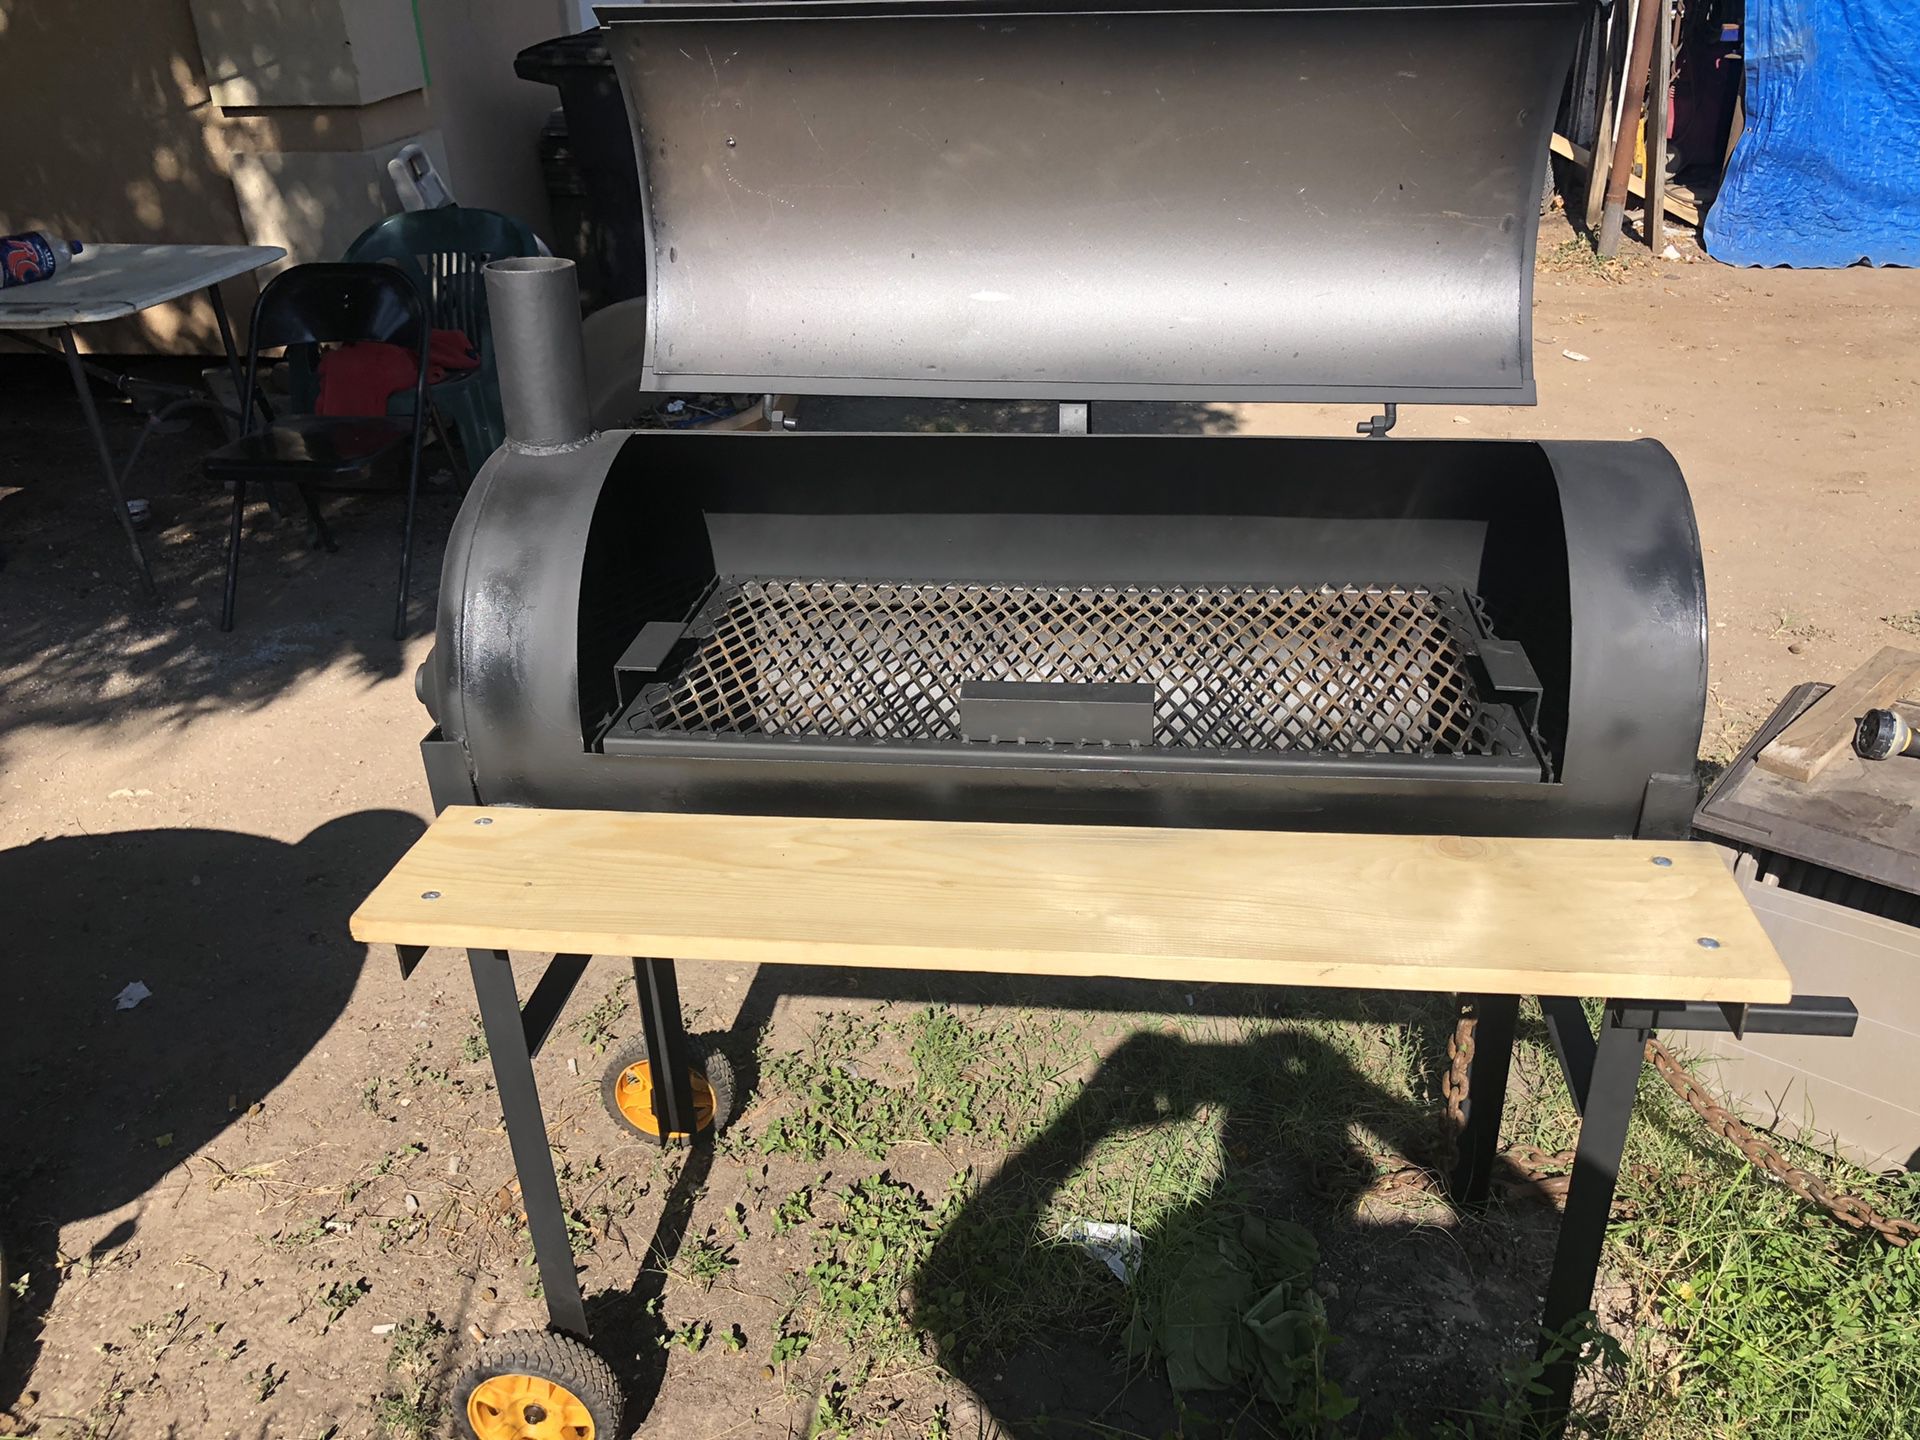 New BBQ pit never used,I just finished making it